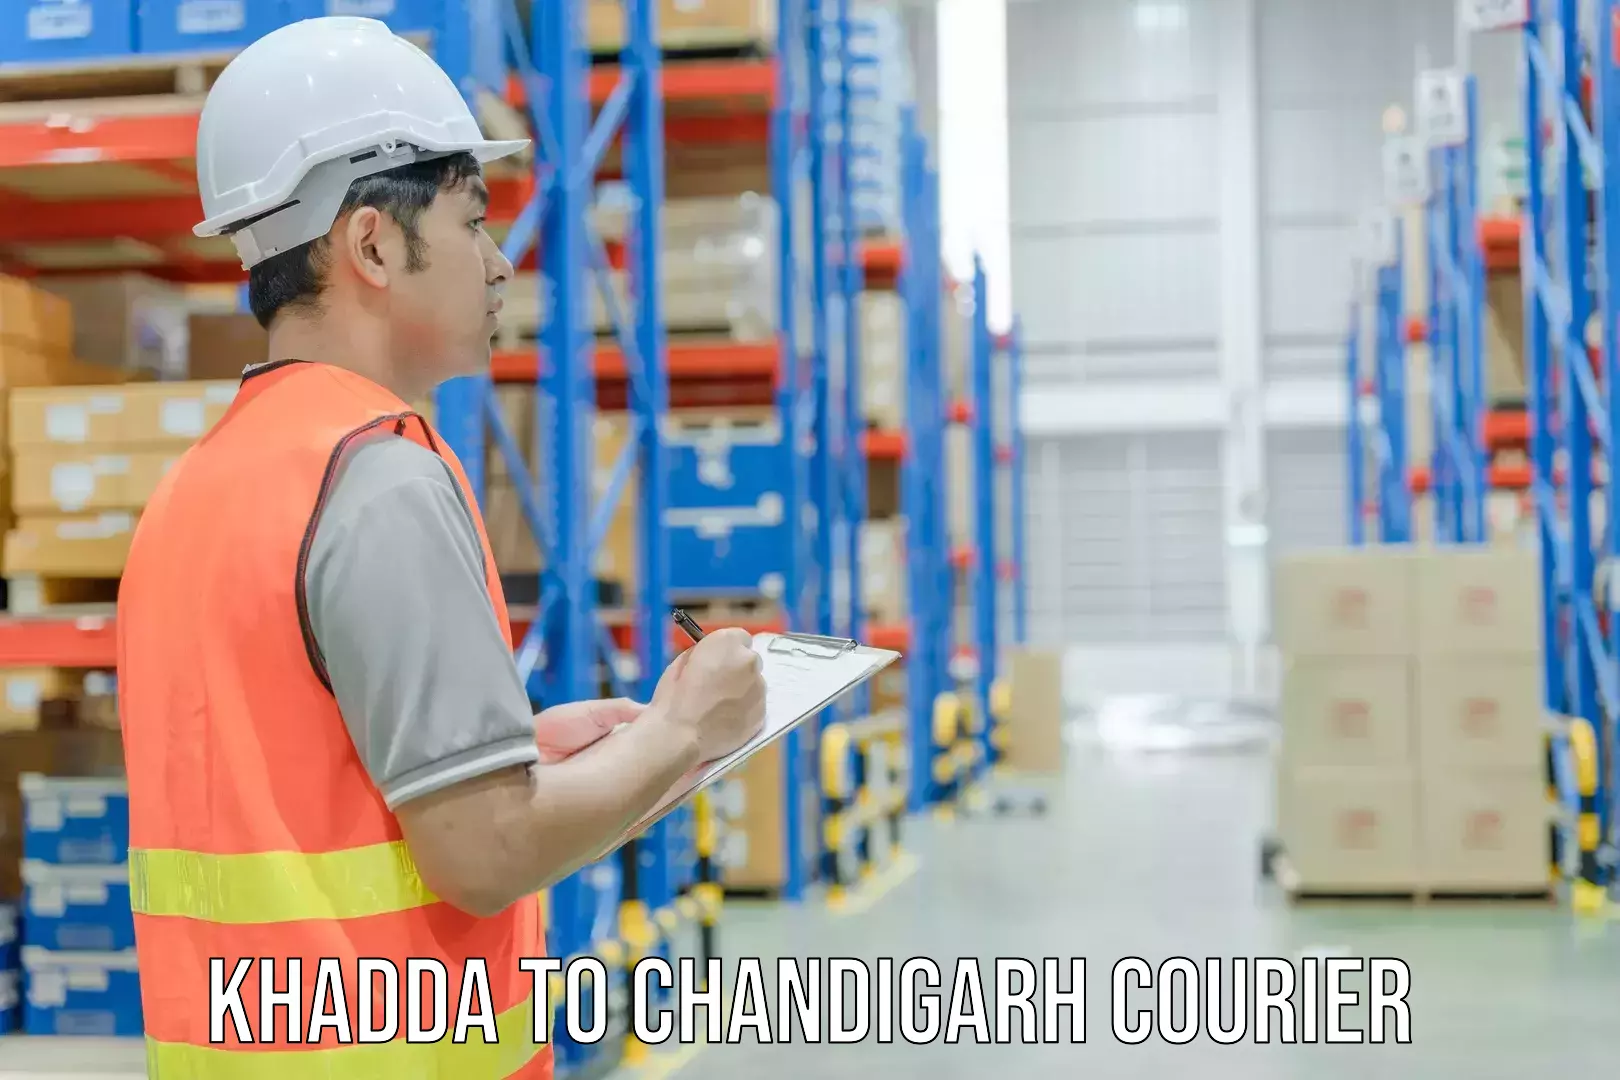 Global delivery options Khadda to Chandigarh